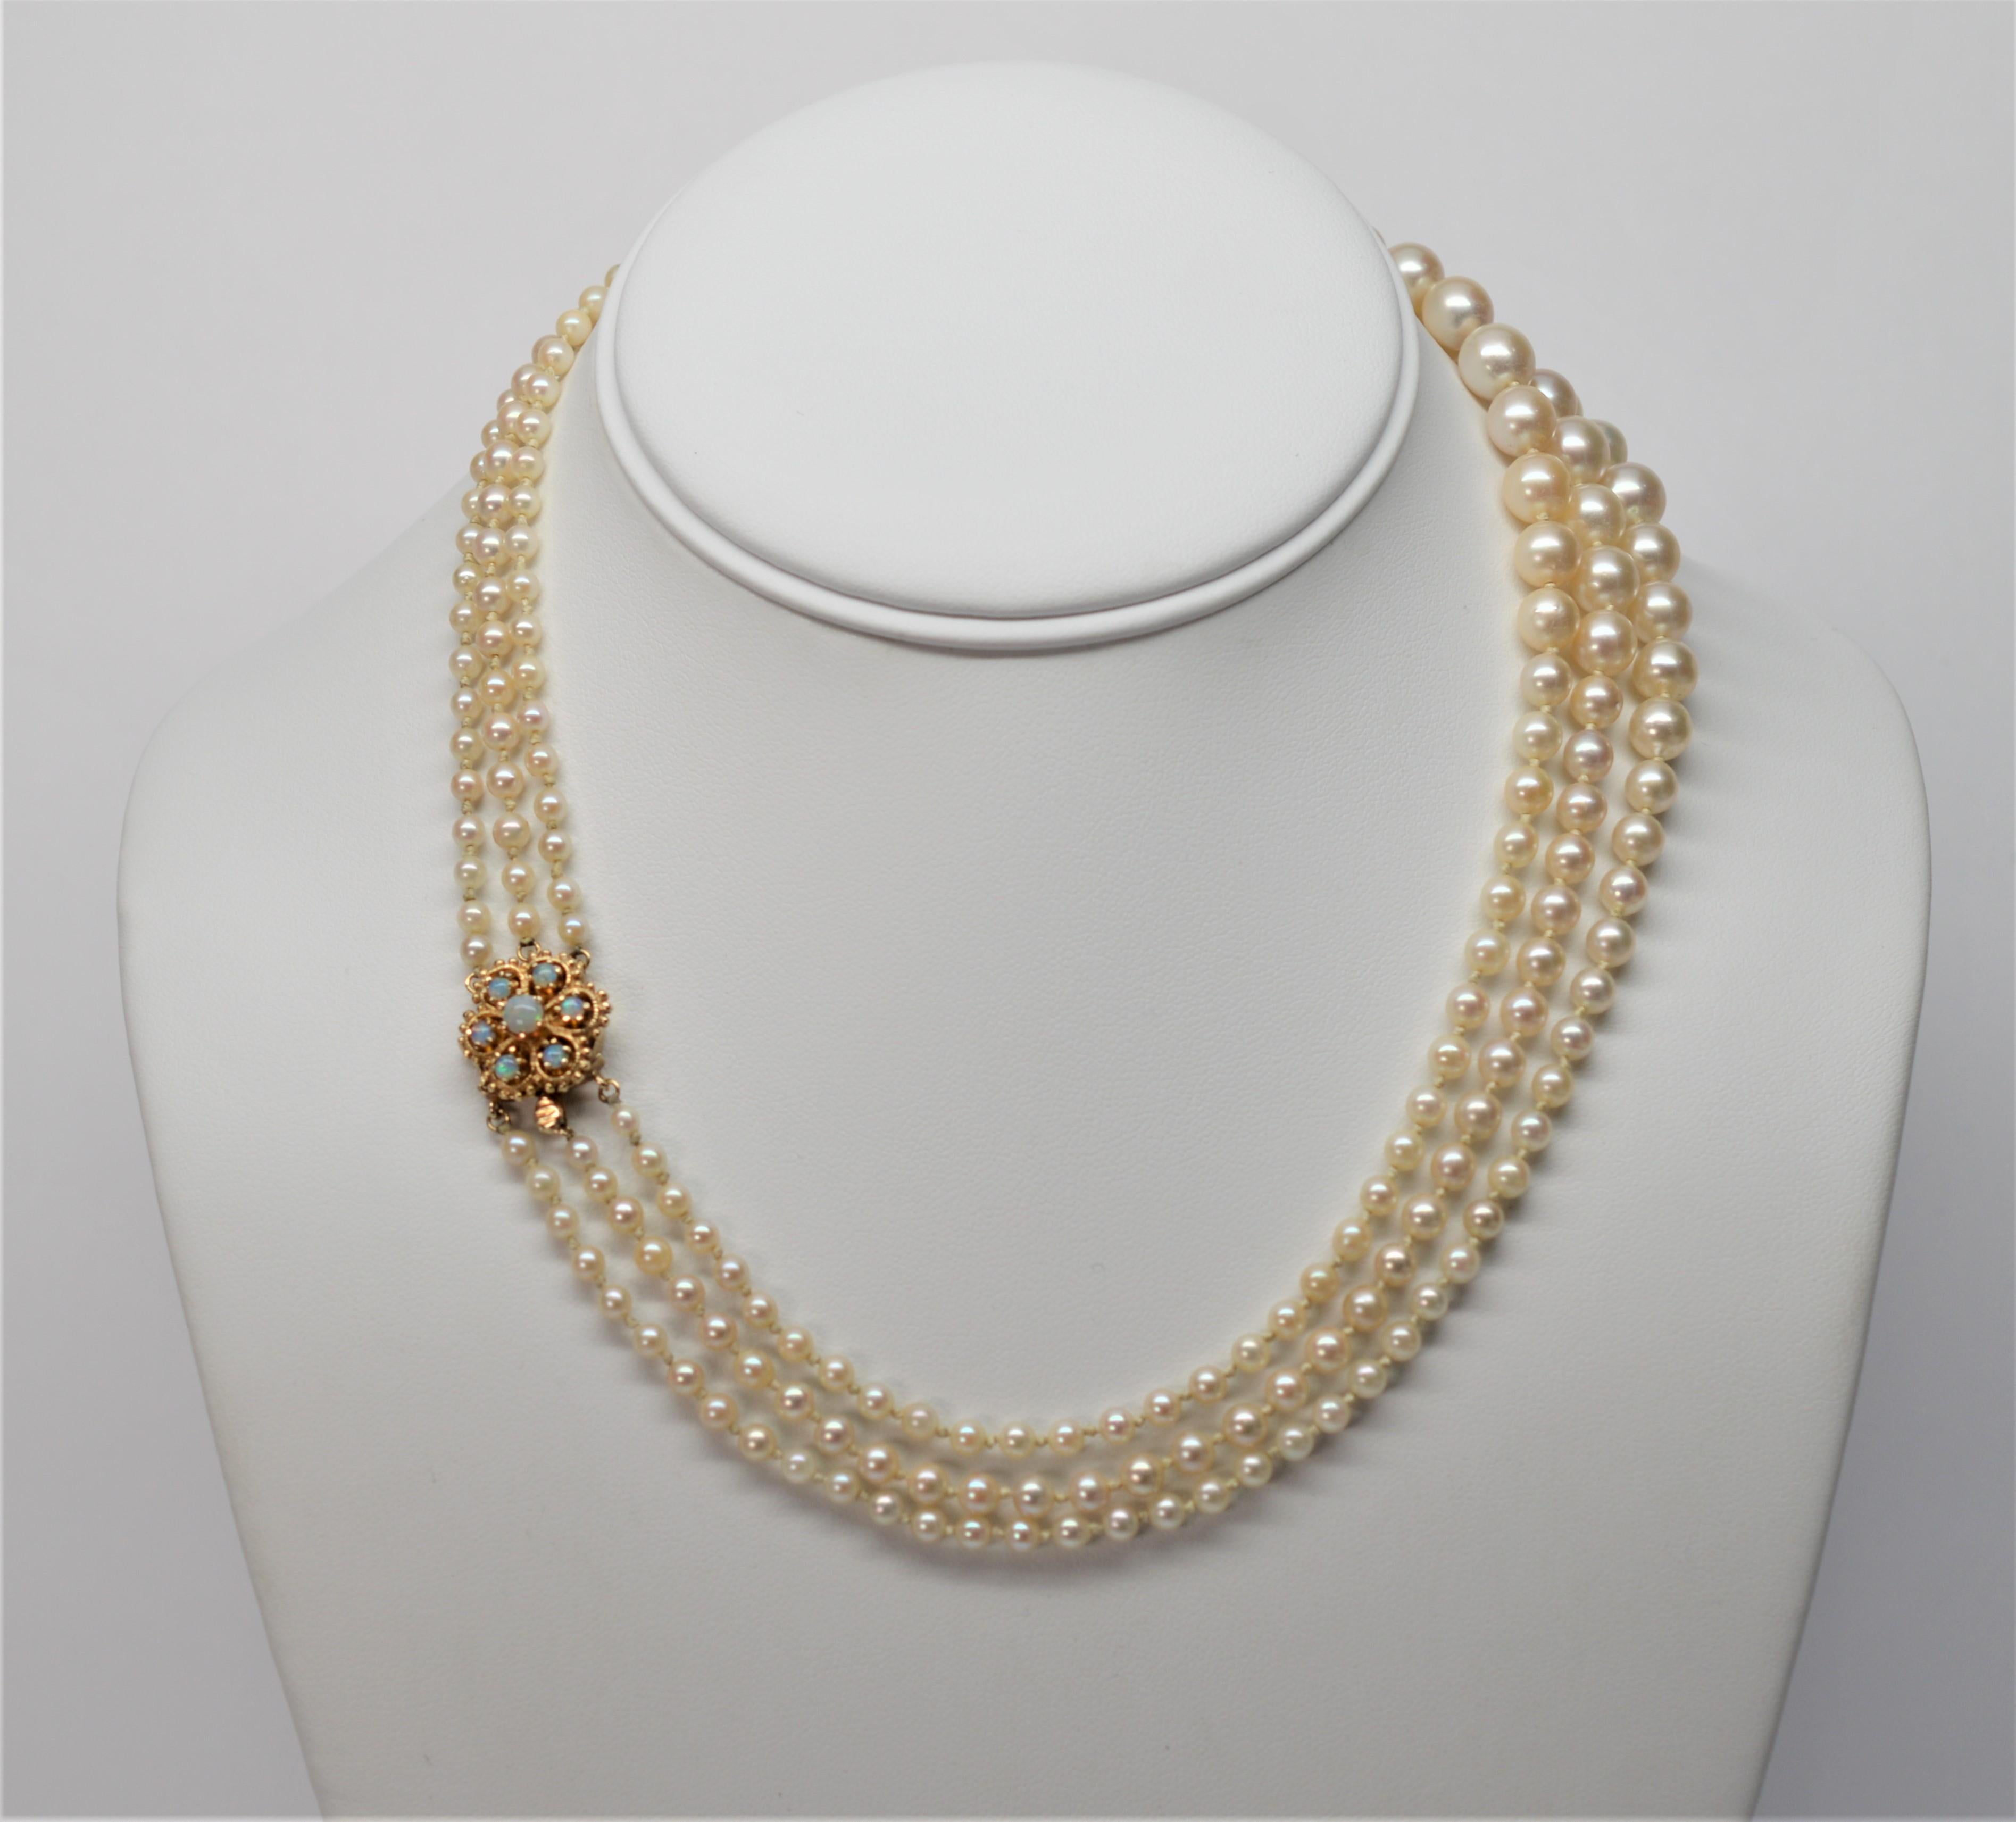 Women's Triple Strand Akoya Pearl Necklace with 14K Yellow Gold & Opal Clasp